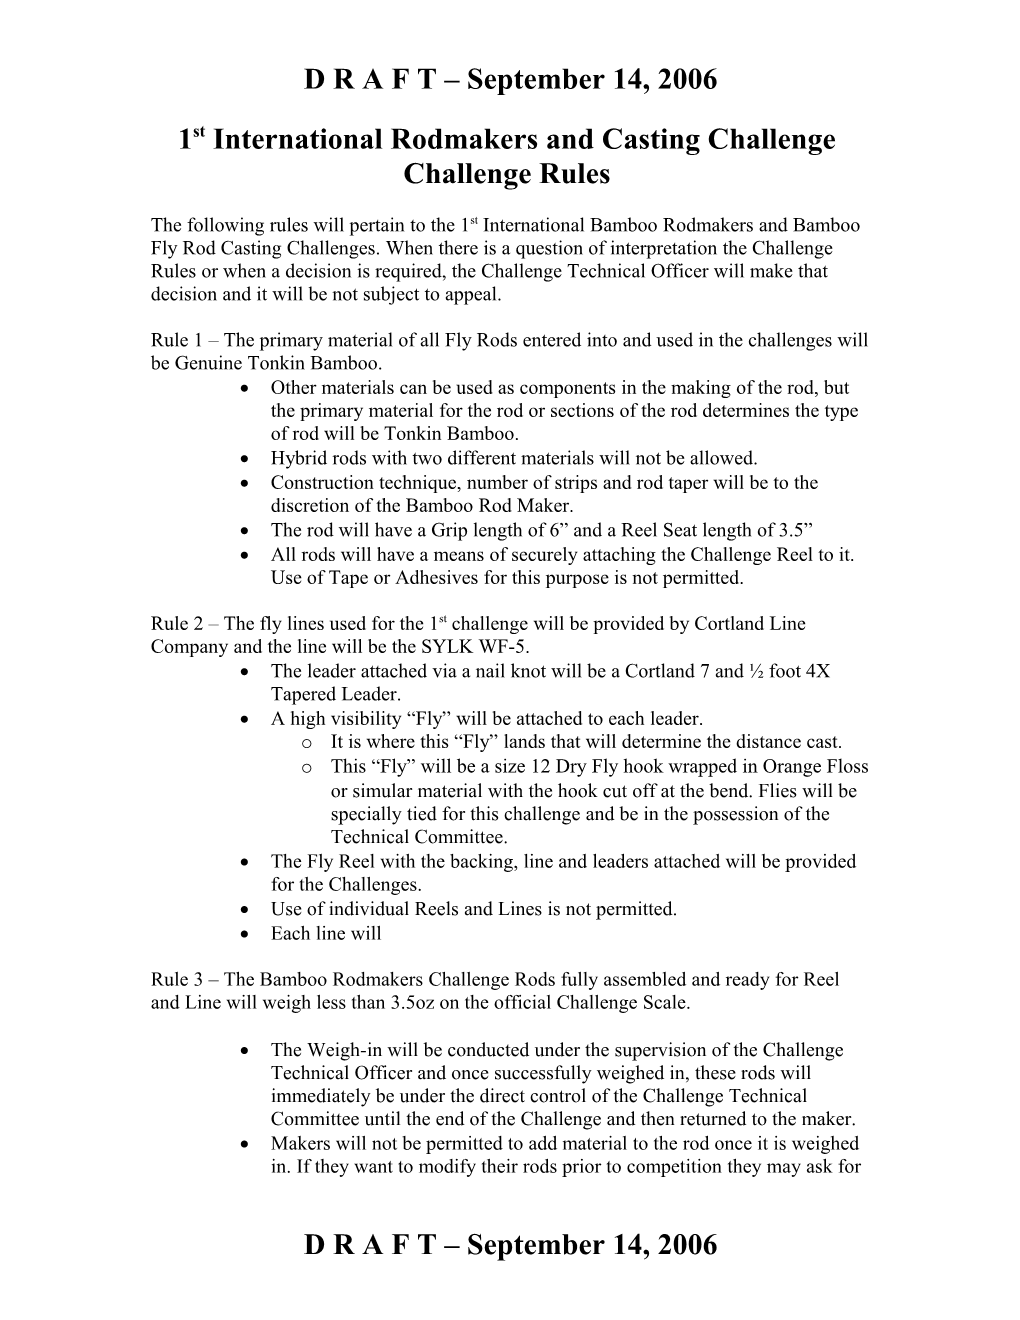 Rodmakers and Casting Challenge Rules